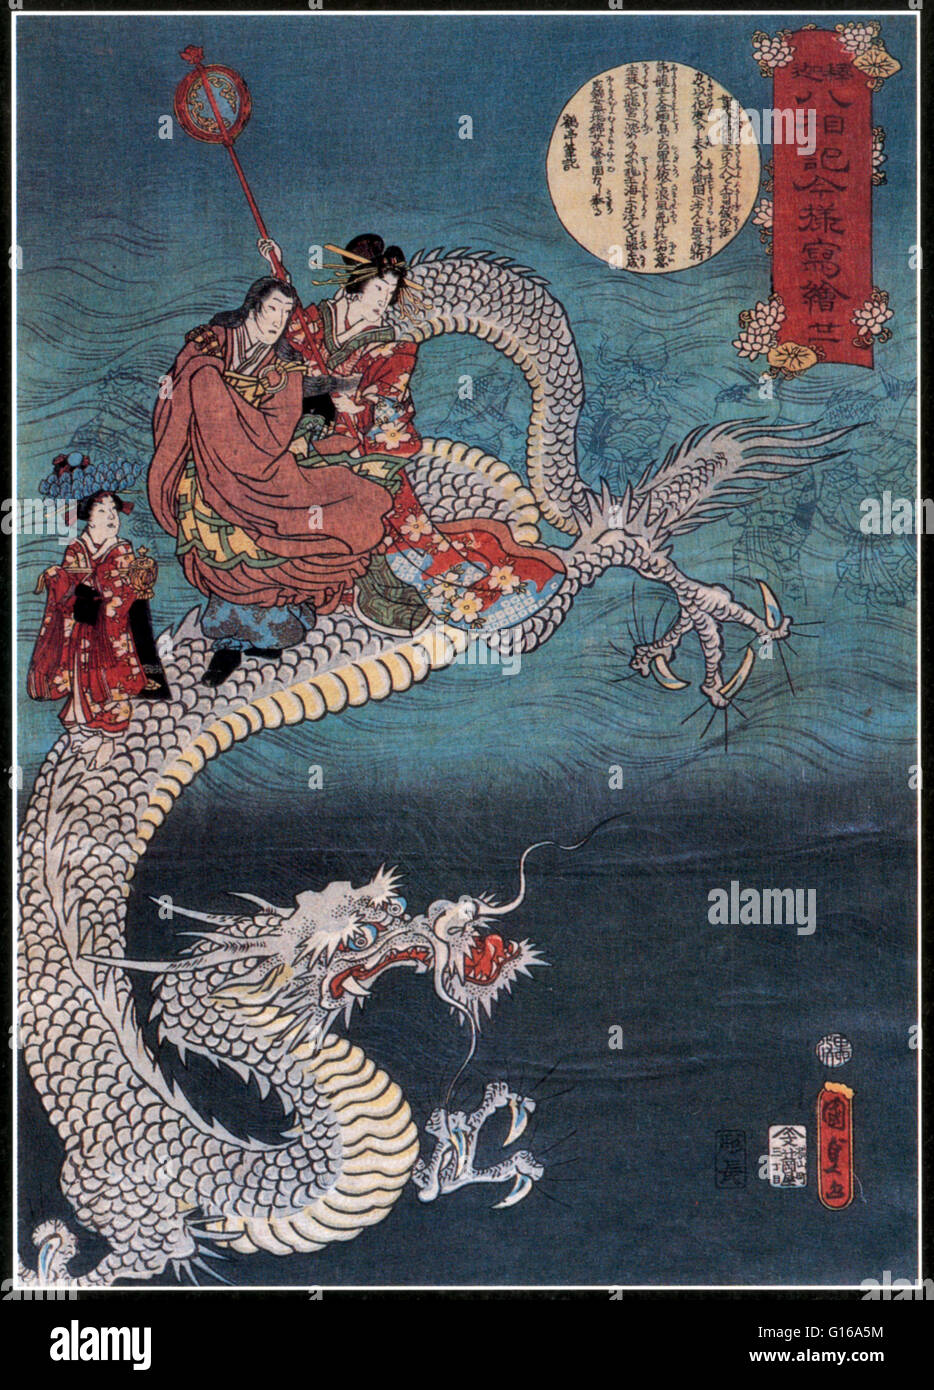 The Buddha riding on the back of a giant sea-dragon. Gautama Buddha or simply the Buddha was a spiritual teacher from India. He is the founder of Buddhism and one of the most influential religious thinkers of Asia. A dragon is a legendary creature, typica Stock Photo